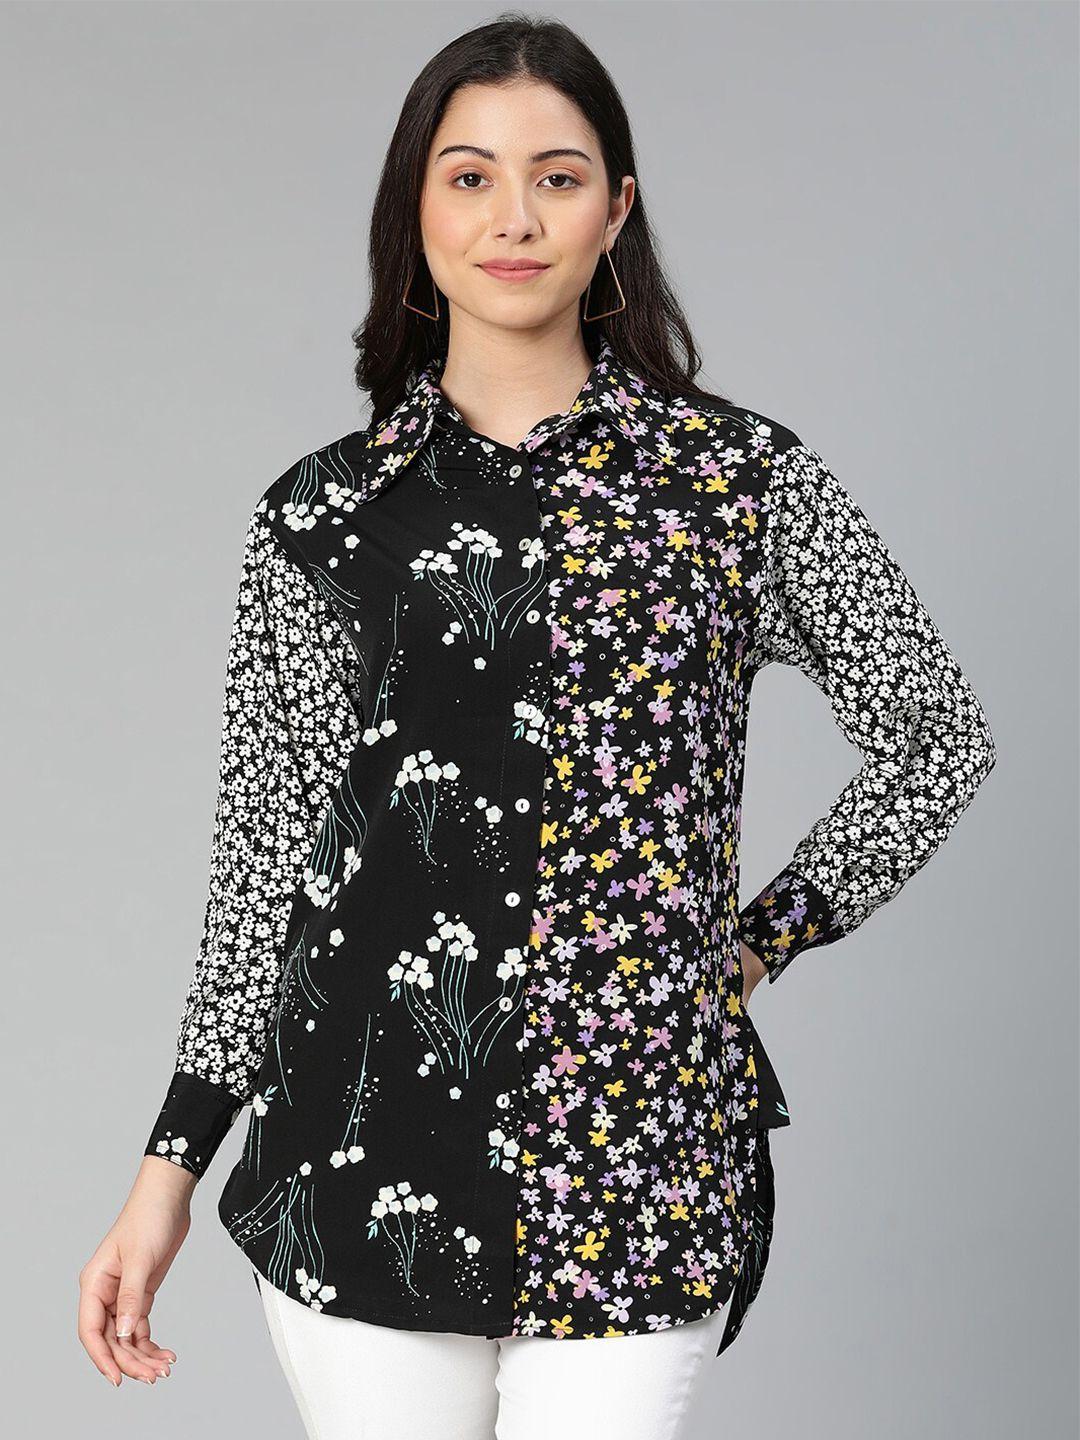 oxolloxo-women-black-standard-floral-printed-casual-shirt